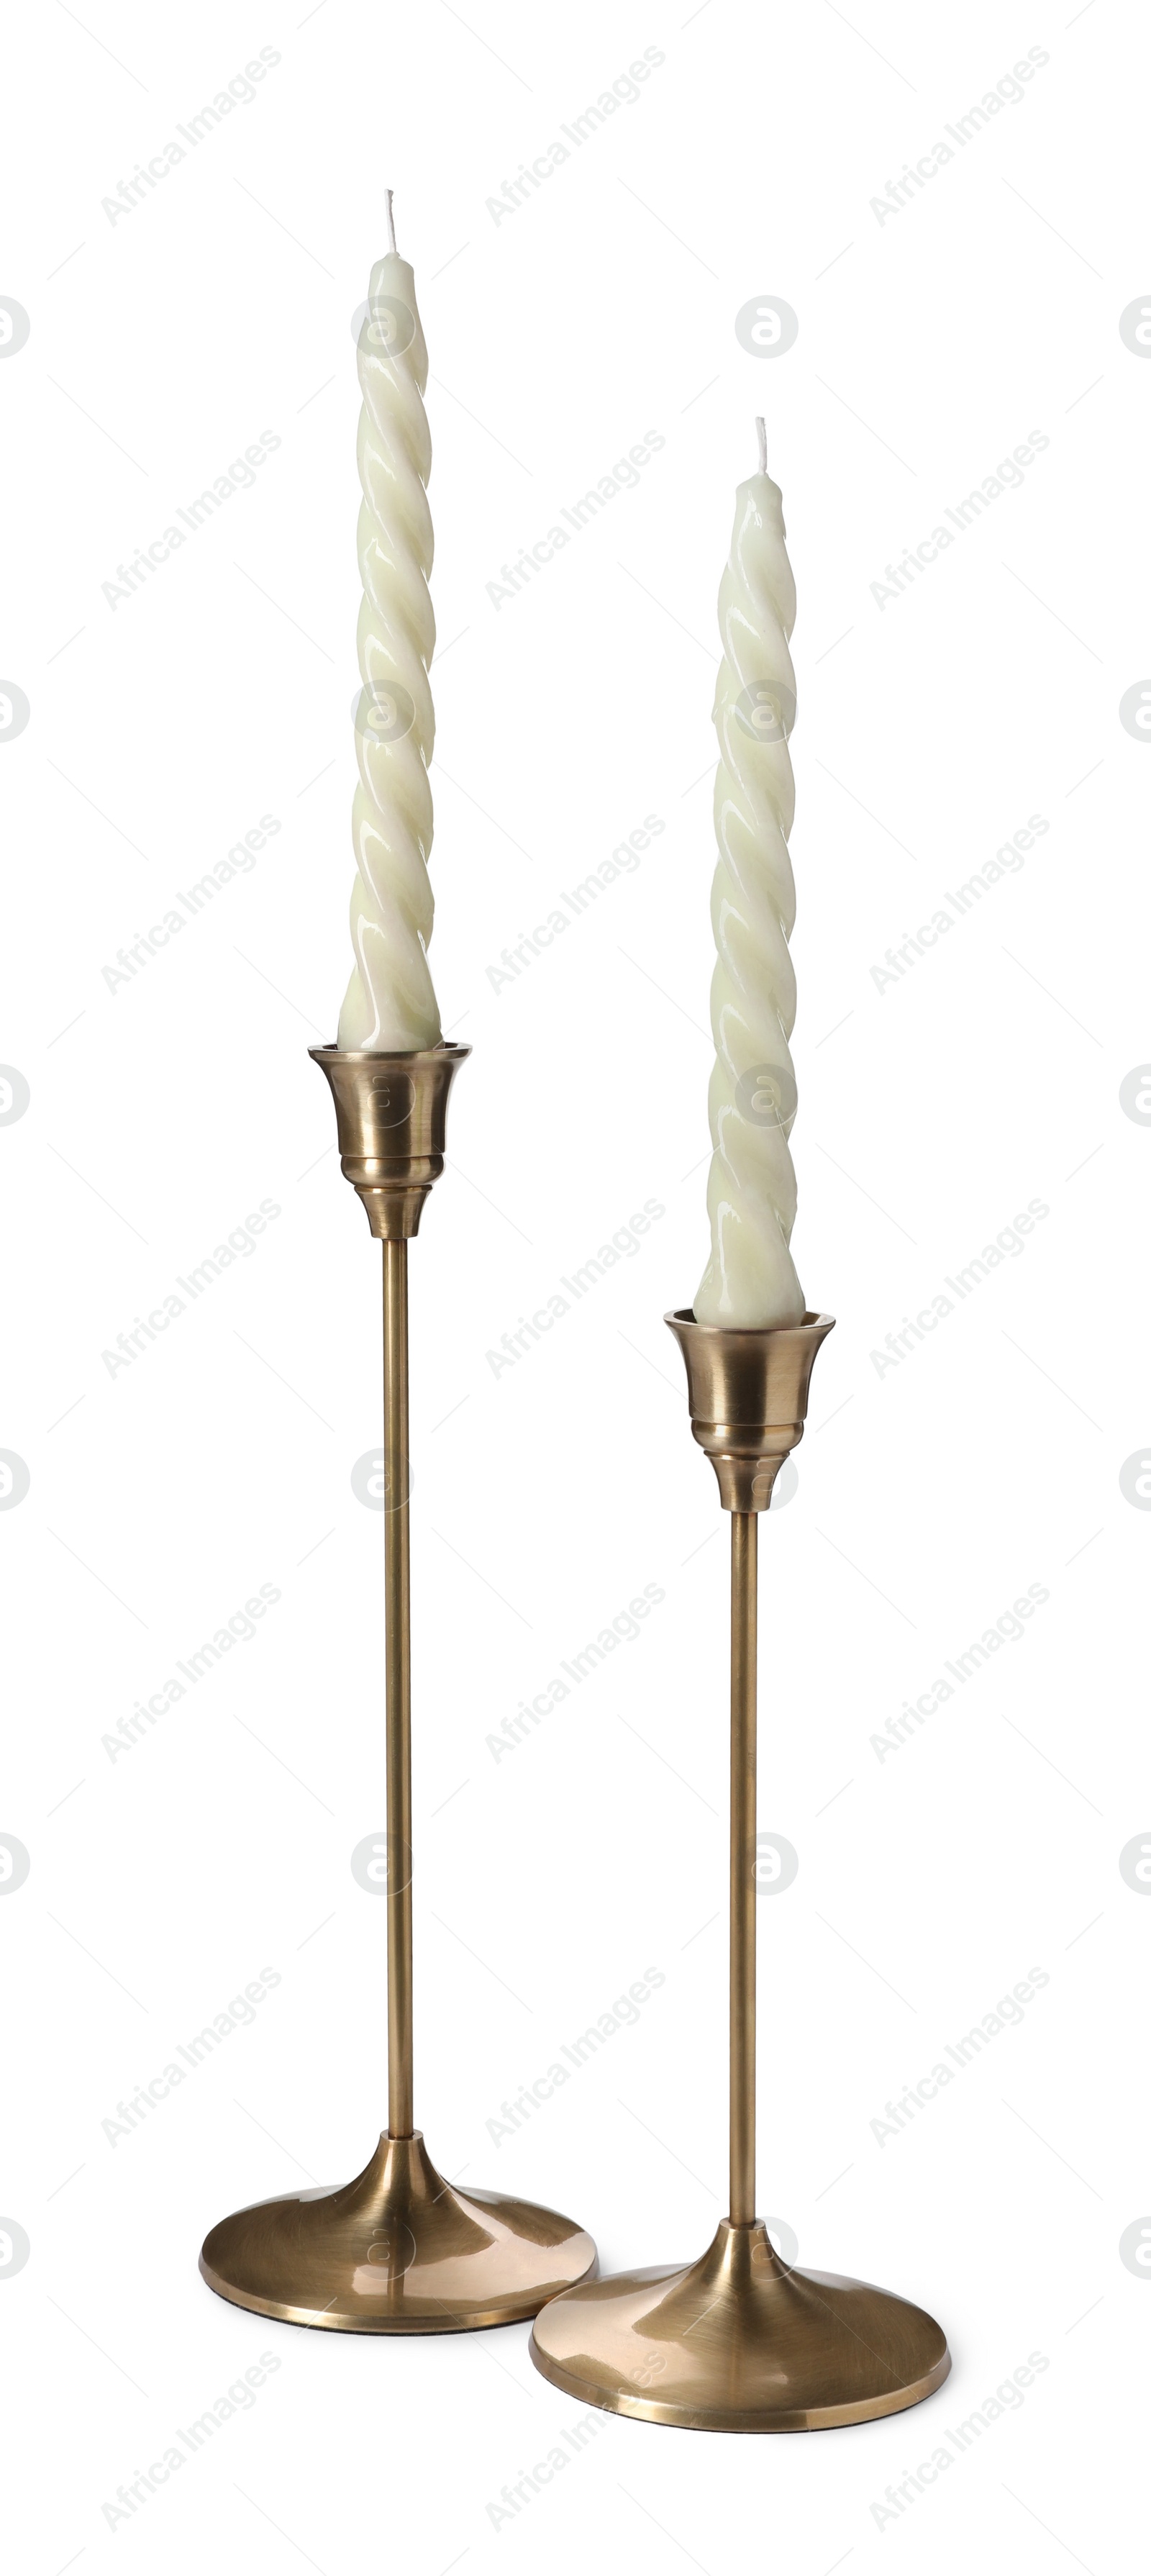 Photo of Vintage metal candlesticks with candles on white background